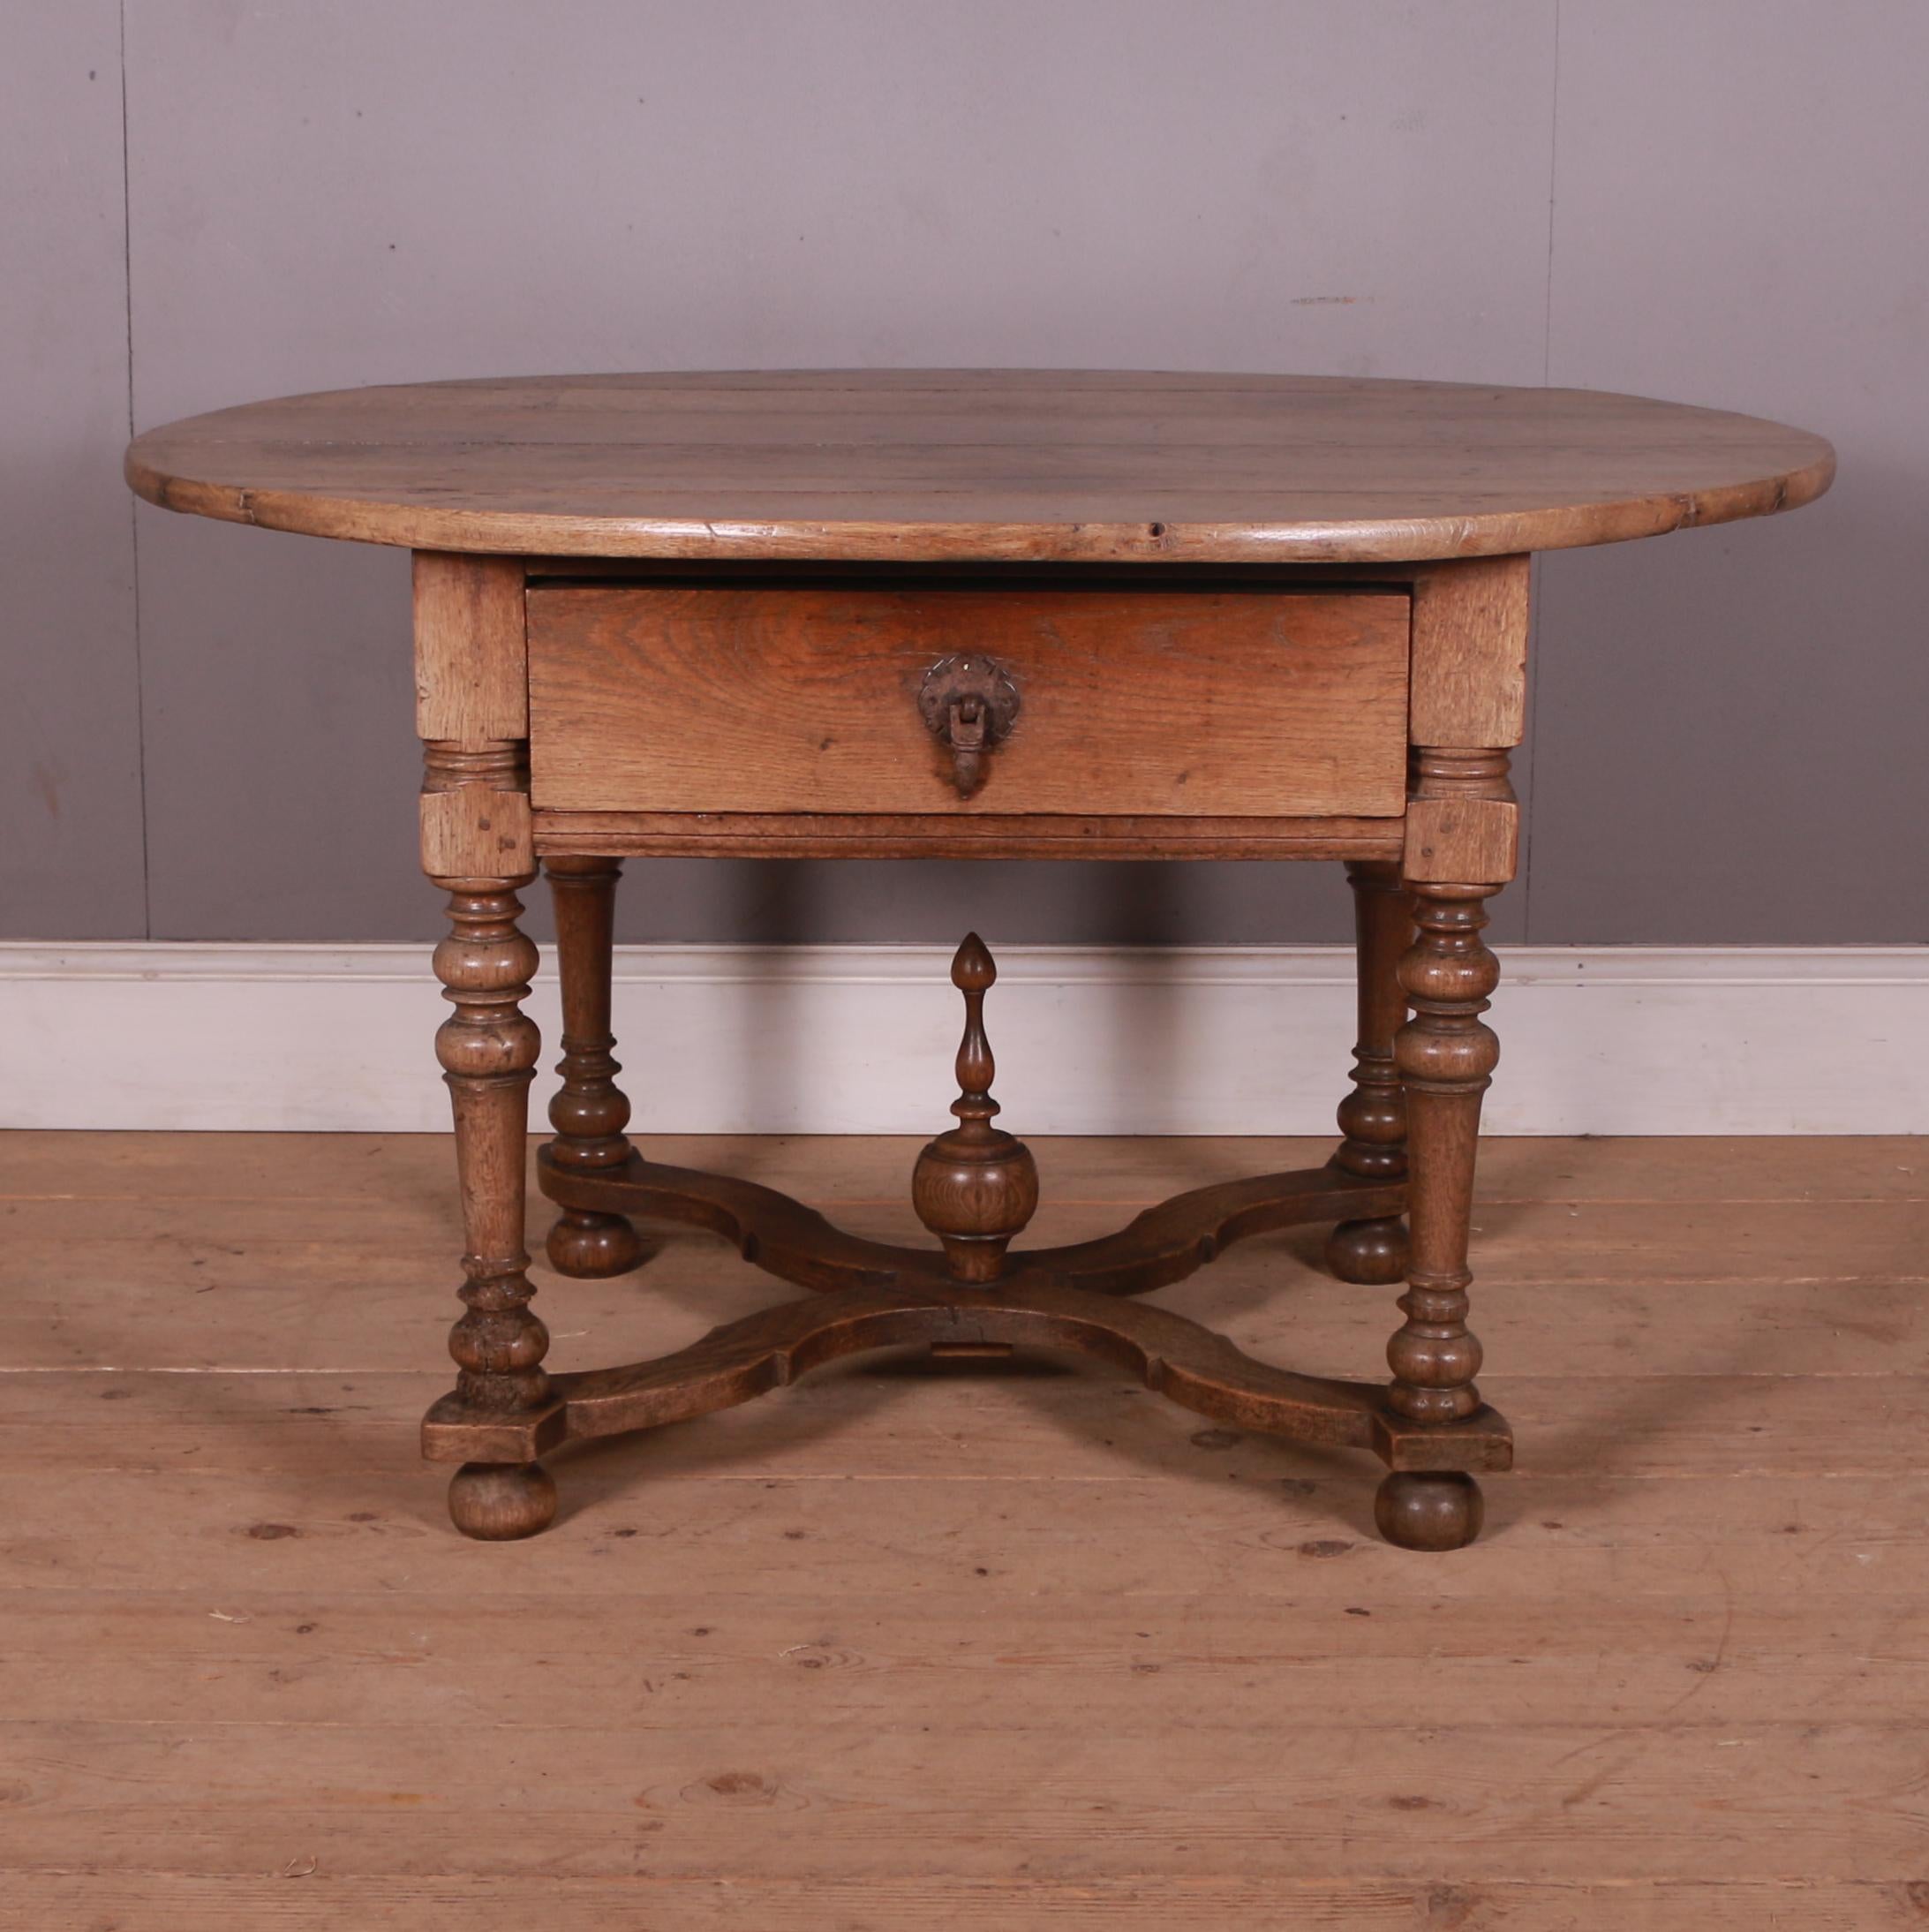 Good 19th C Dutch lamp table with a lovely oval pale oak lamp table 1820.

Reference: 7400

Dimensions
47.5 inches (121 cms) Wide
37 inches (94 cms) Deep
28 inches (71 cms) High.